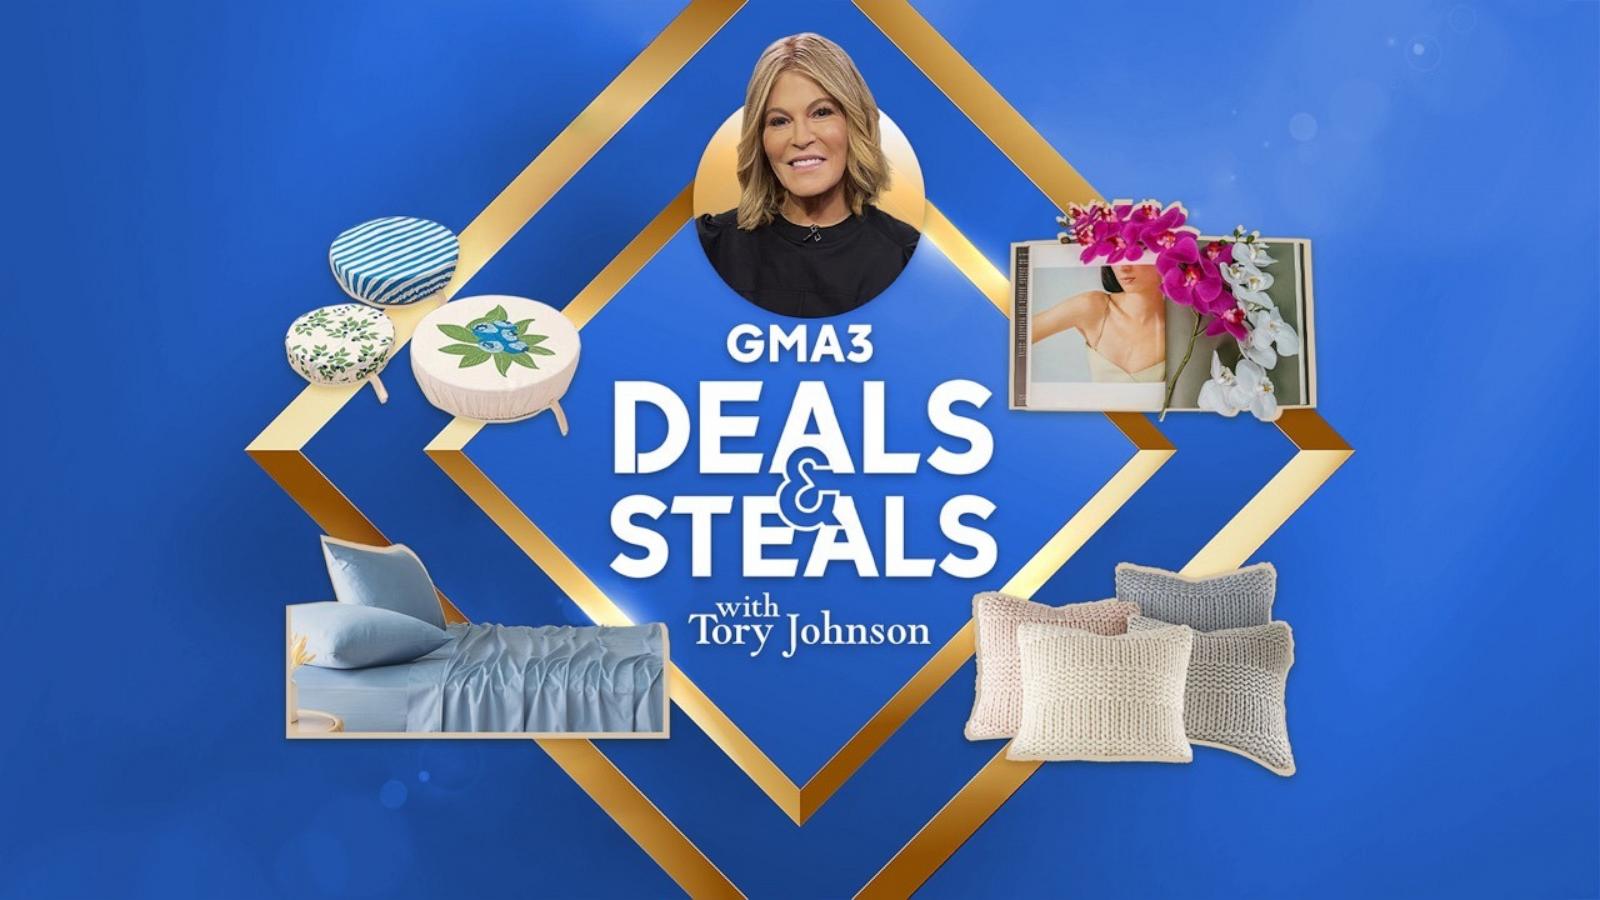 Today's Access Hollywood Deals - All Access Deals